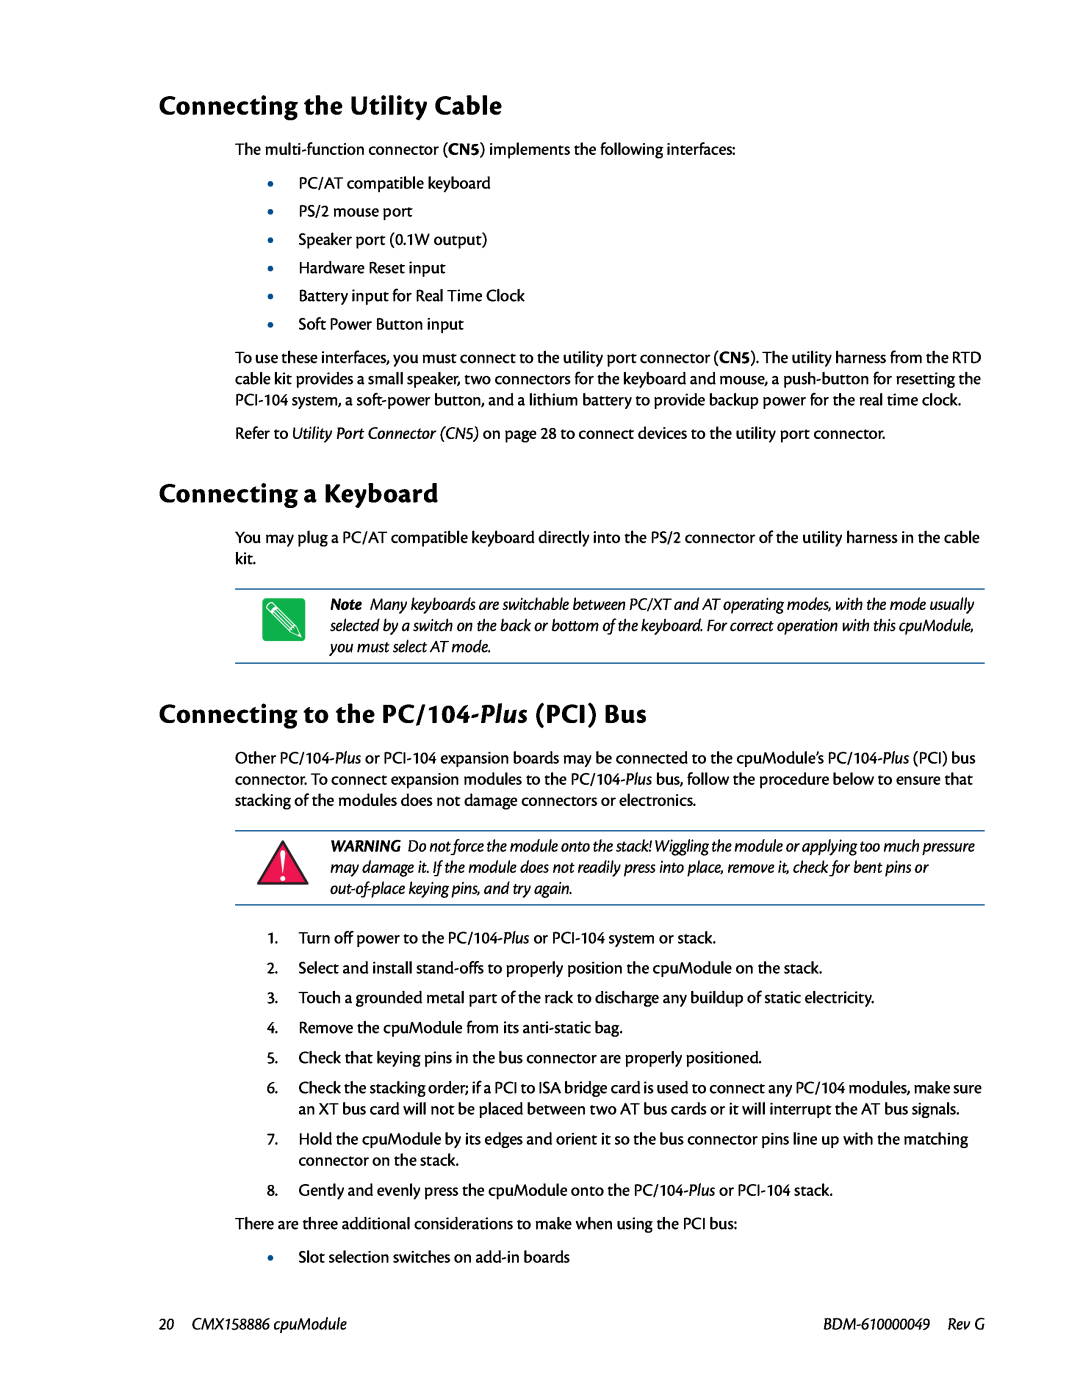 IBM BDM-610000049 user manual Connecting the Utility Cable, Connecting a Keyboard, Connecting to the PC/104-Plus PCI Bus 